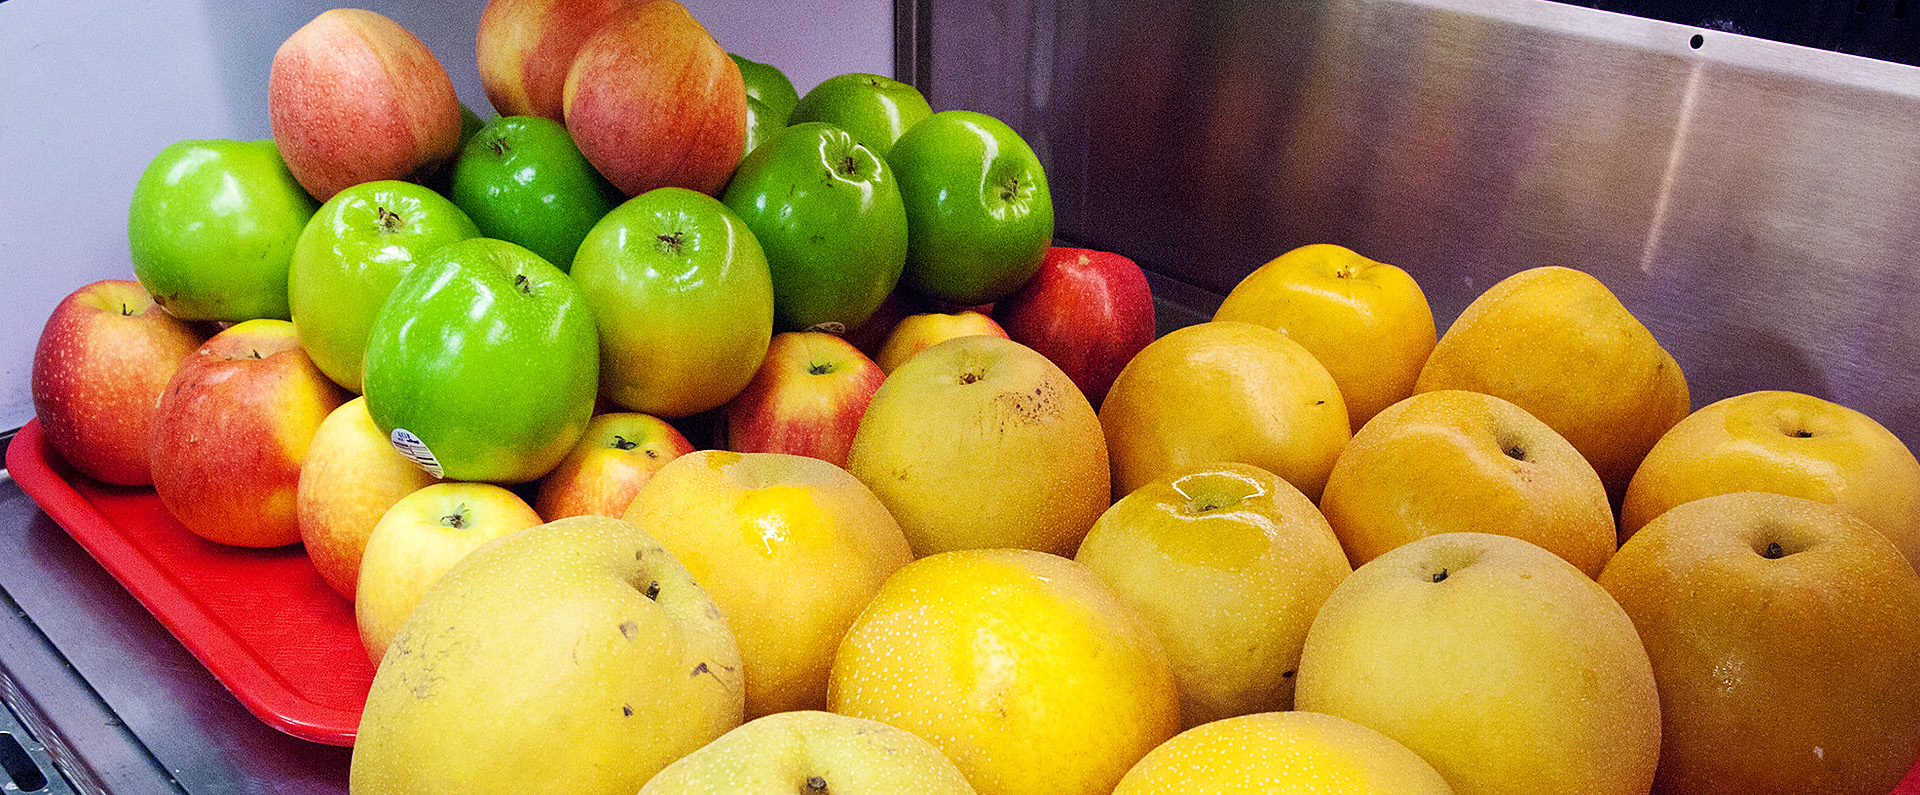 Red, green and yellow apples.